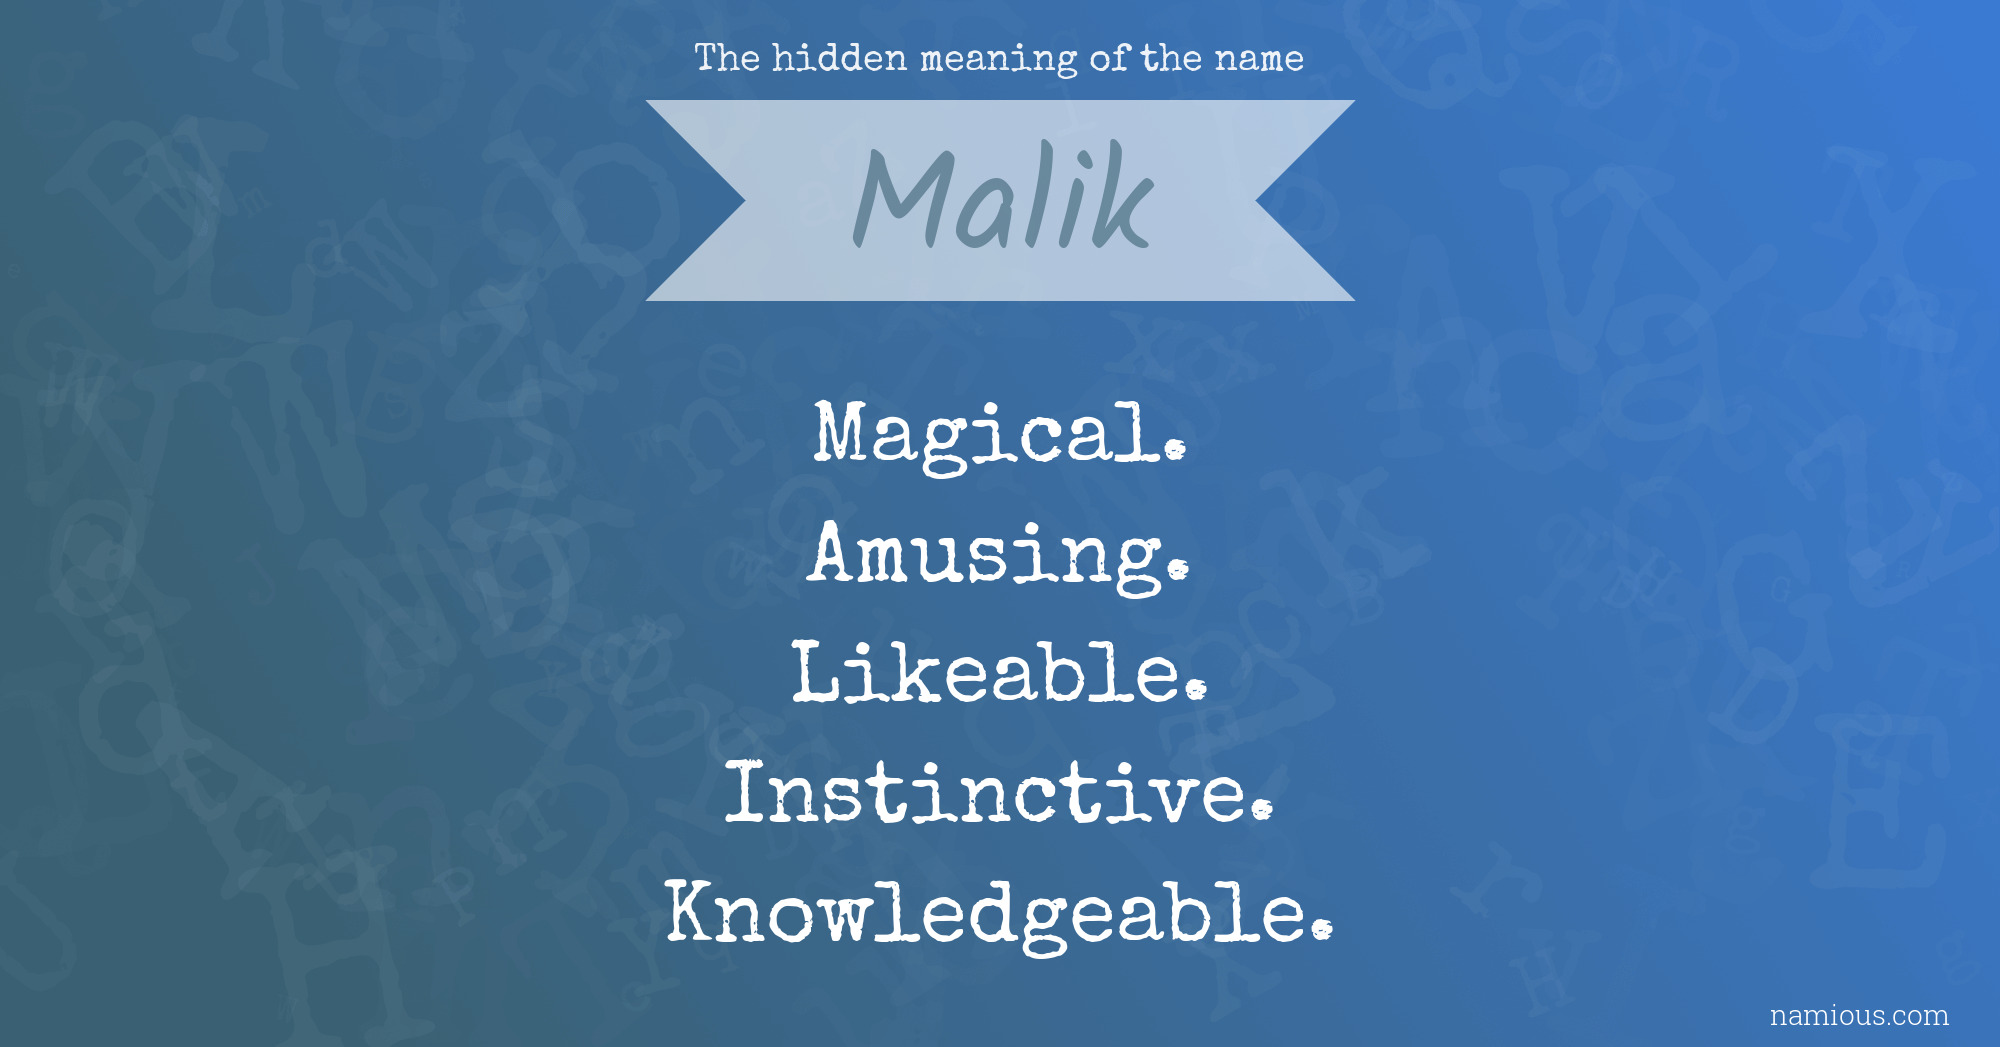 The hidden meaning of the name Malik